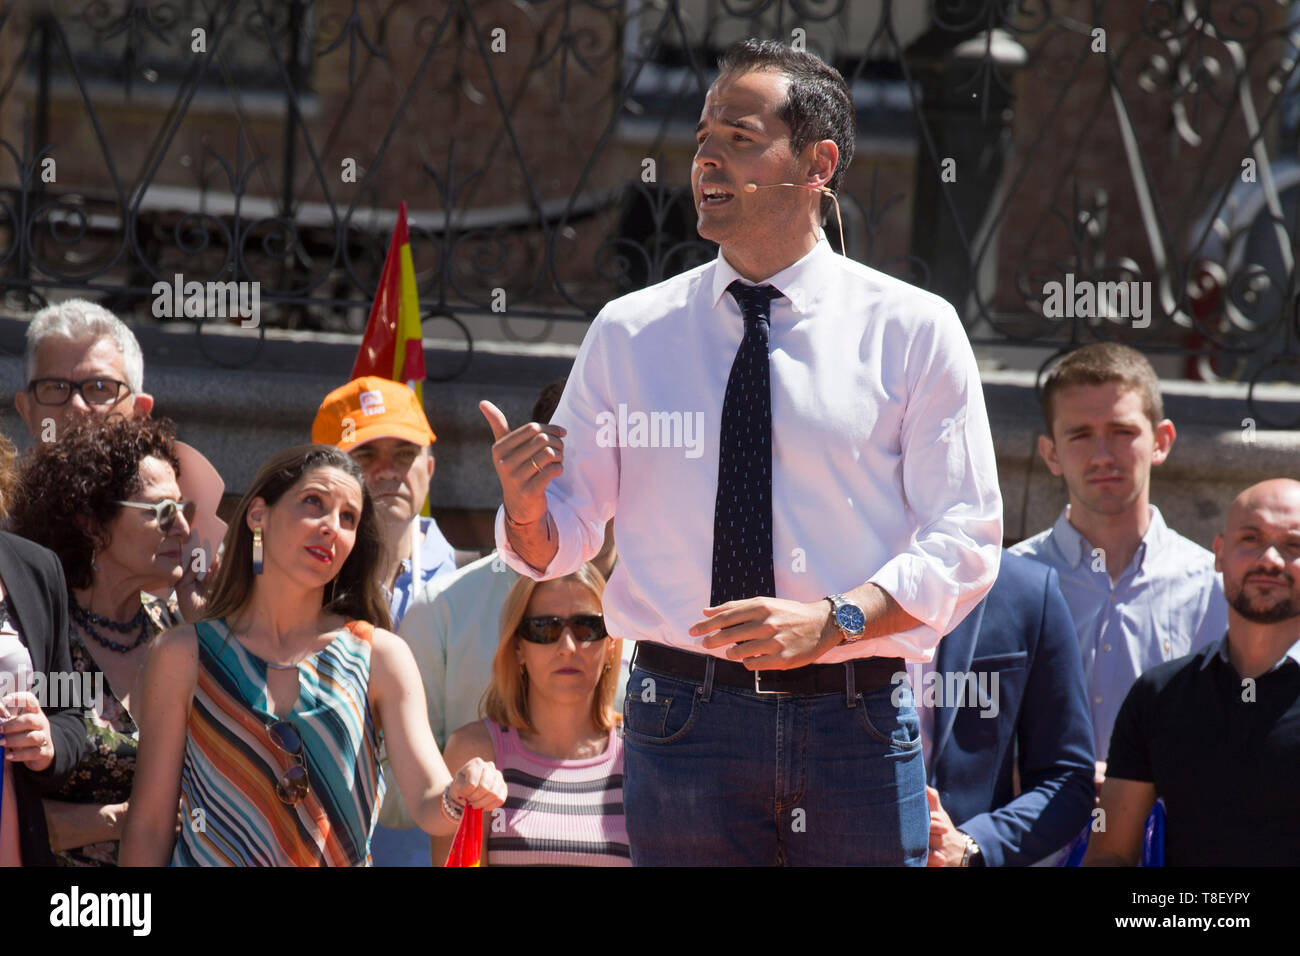 Ignacio Aguado, candidate for the presidency of the region of the Community of Madrid, seen speaking during the rally. Political party Ciudadanos holds its First rally in Madrid for the upcoming European elections, regional elections and local elections for next May 26. Stock Photo